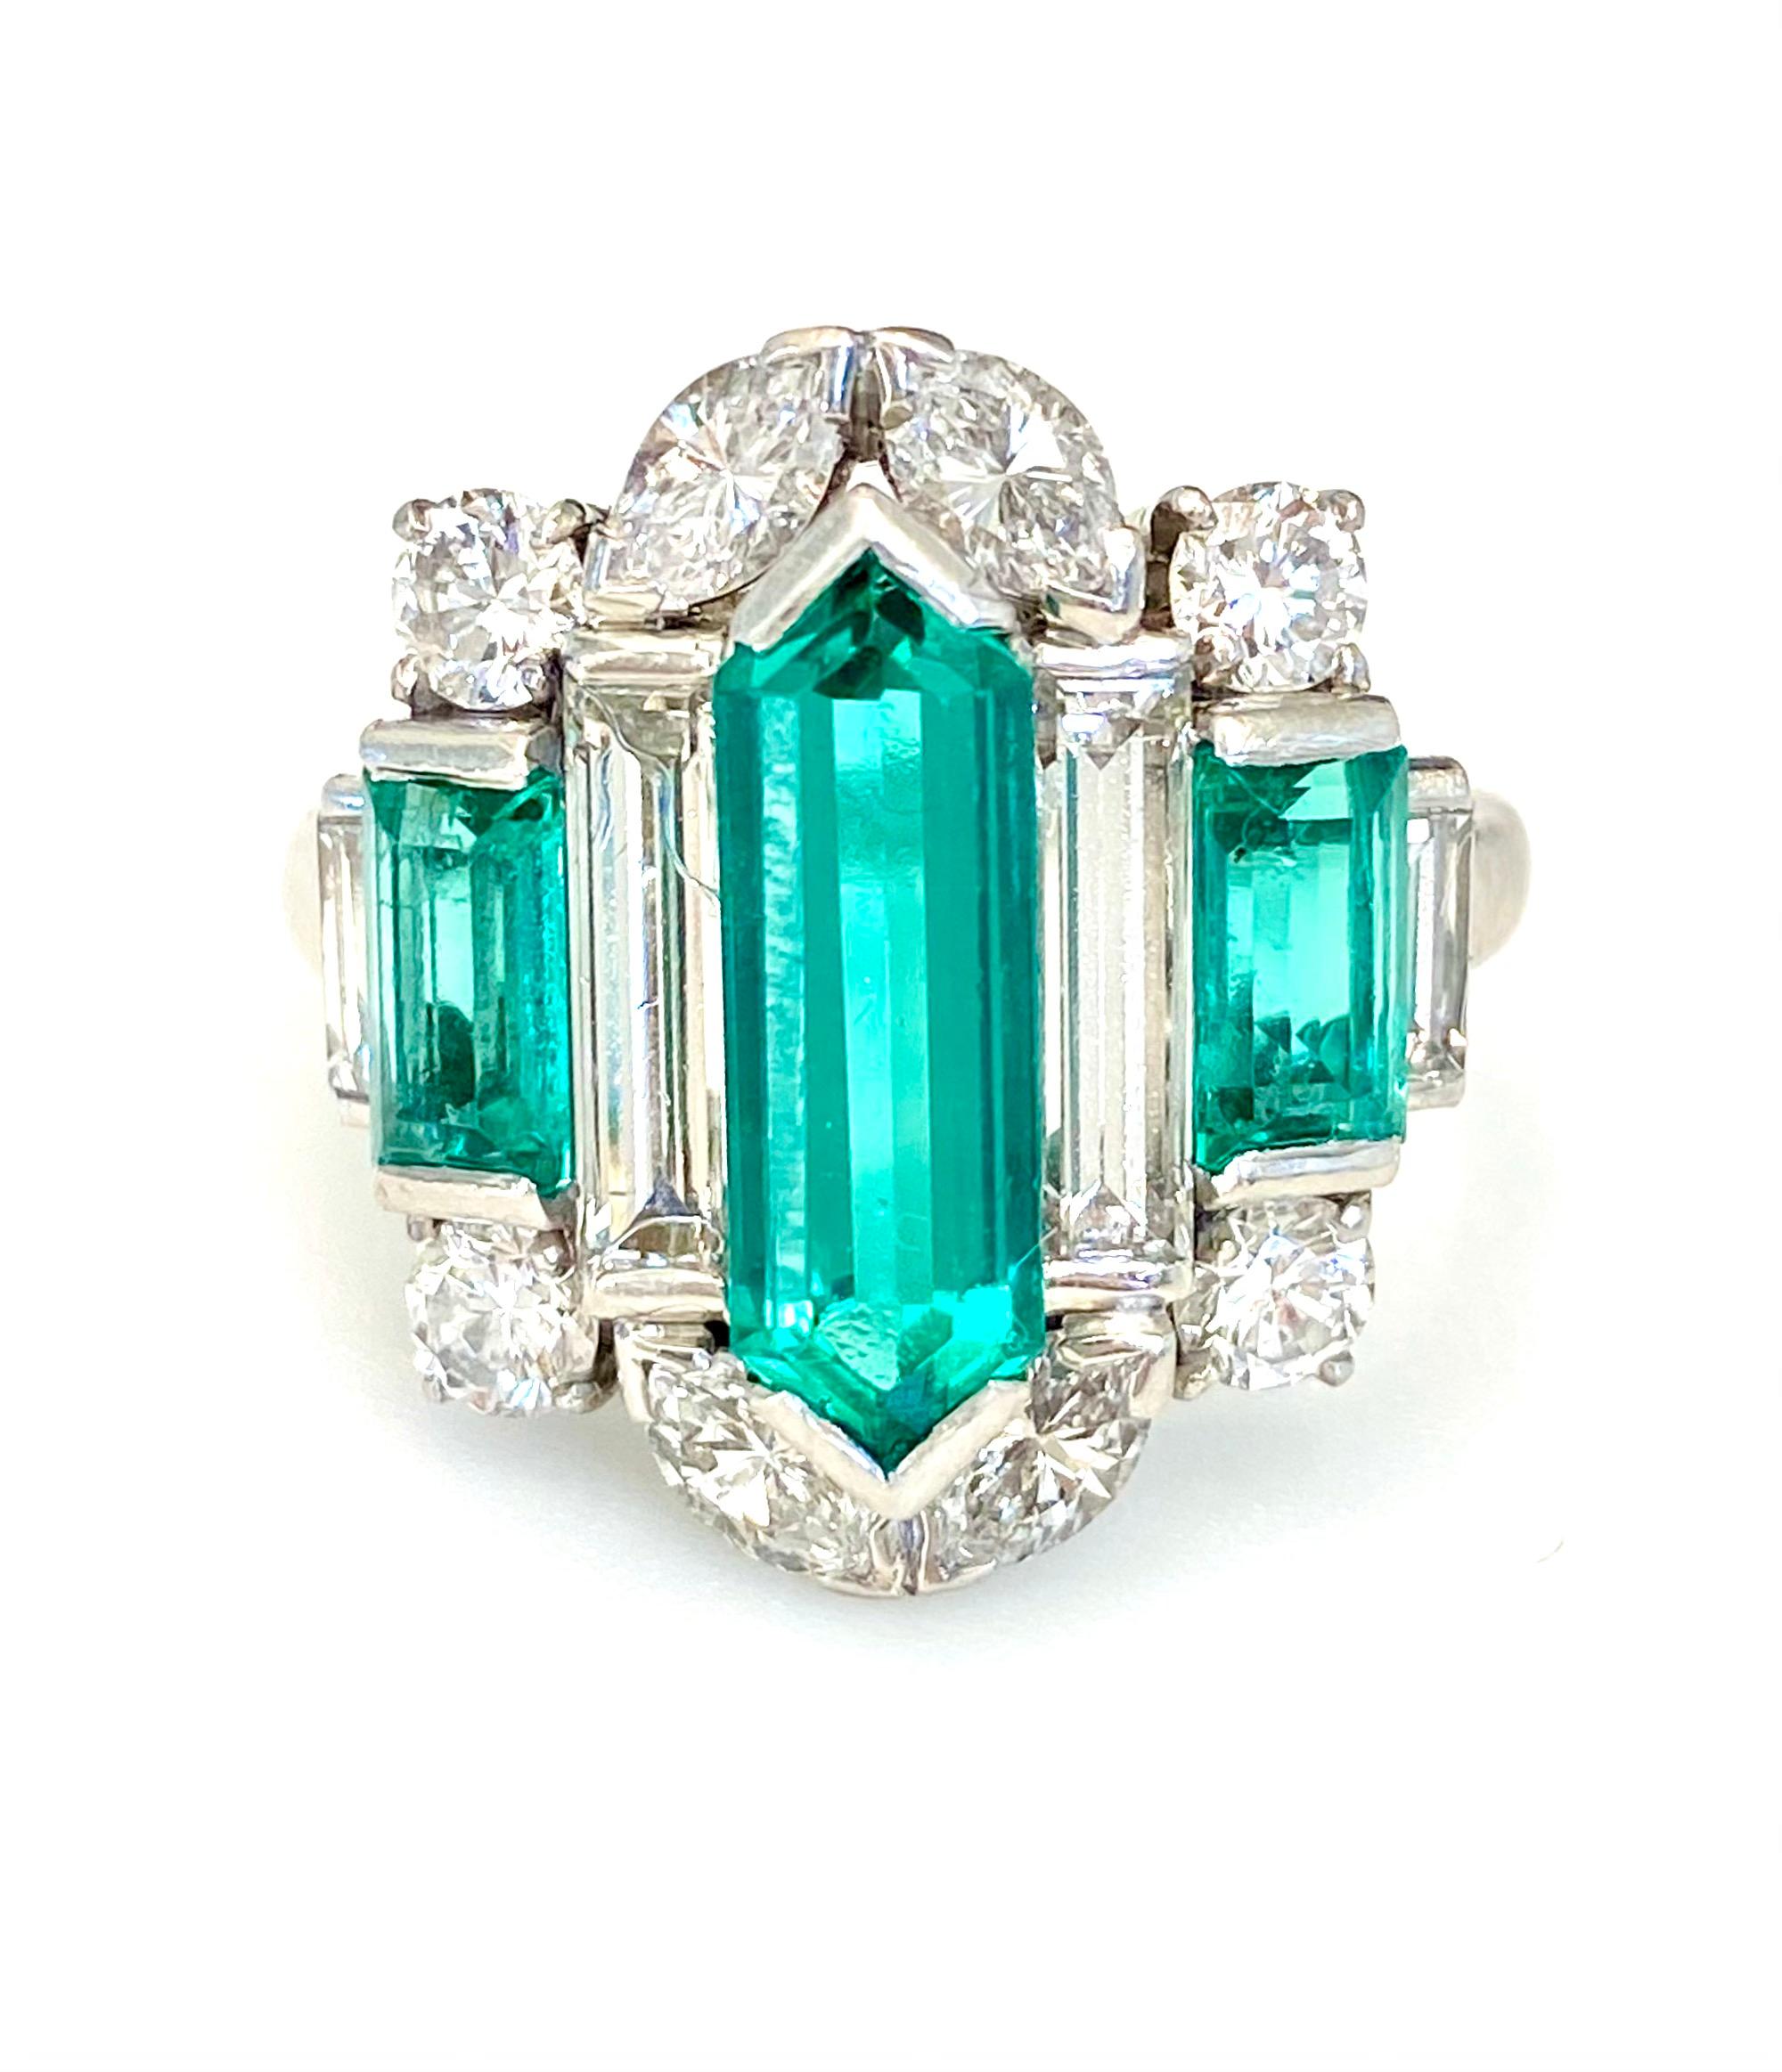 This design consists of a center double bullet cut Colombian emerald flanked by unusual long baguette emeralds, and further accented top and bottom with marquis and European cut diamonds.  Hand made in platinum, the center emerald weighs 2.46 its,